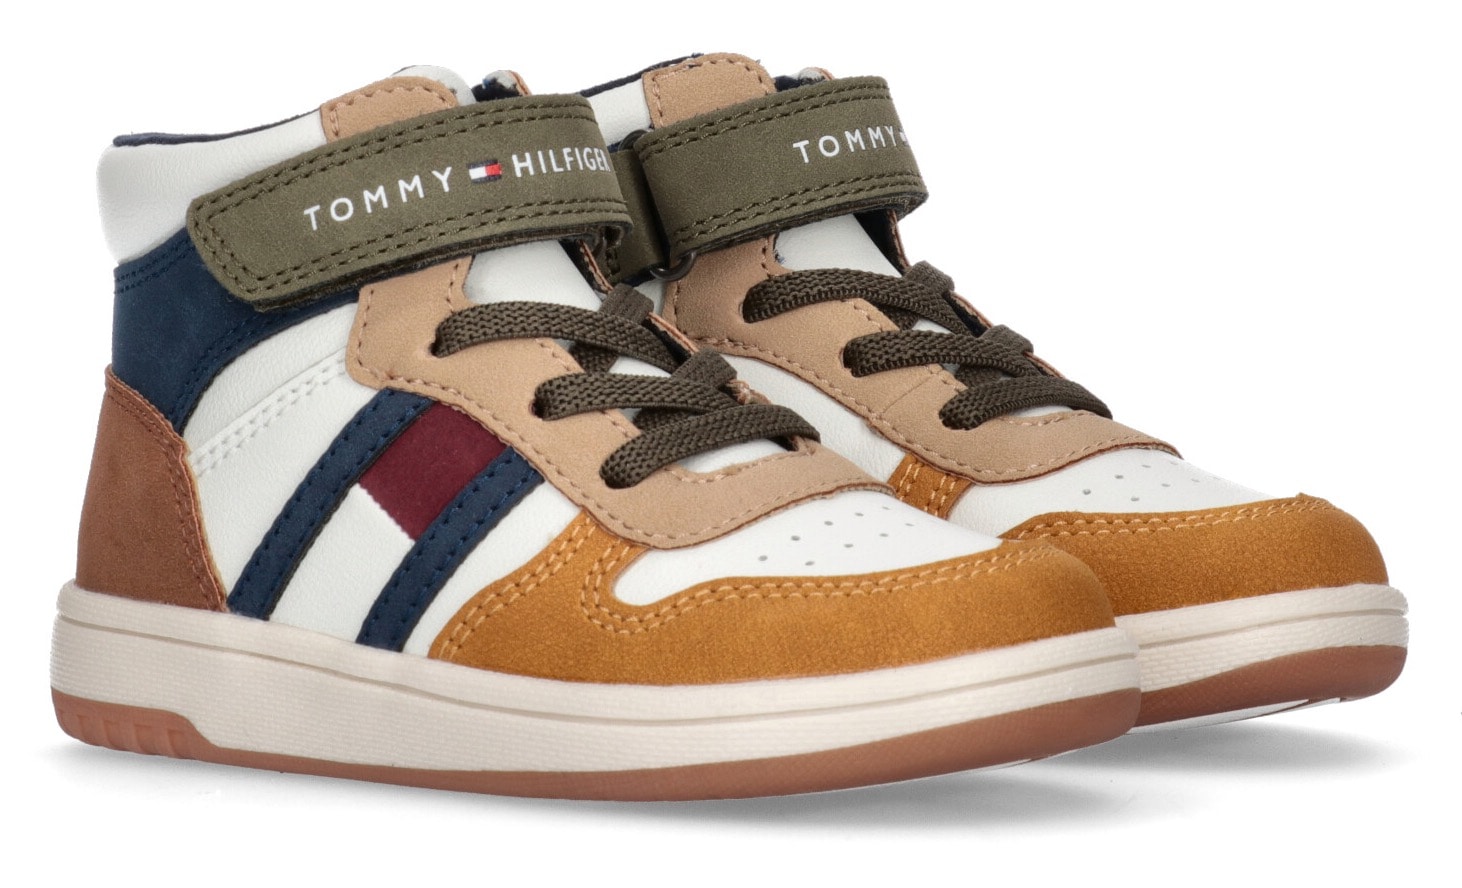 Sneaker bei modischen LACE-UP/VELCRO Tommy »FLAG Look HIGH TOP Hilfiger SNEAKER«, colorblocking im ♕